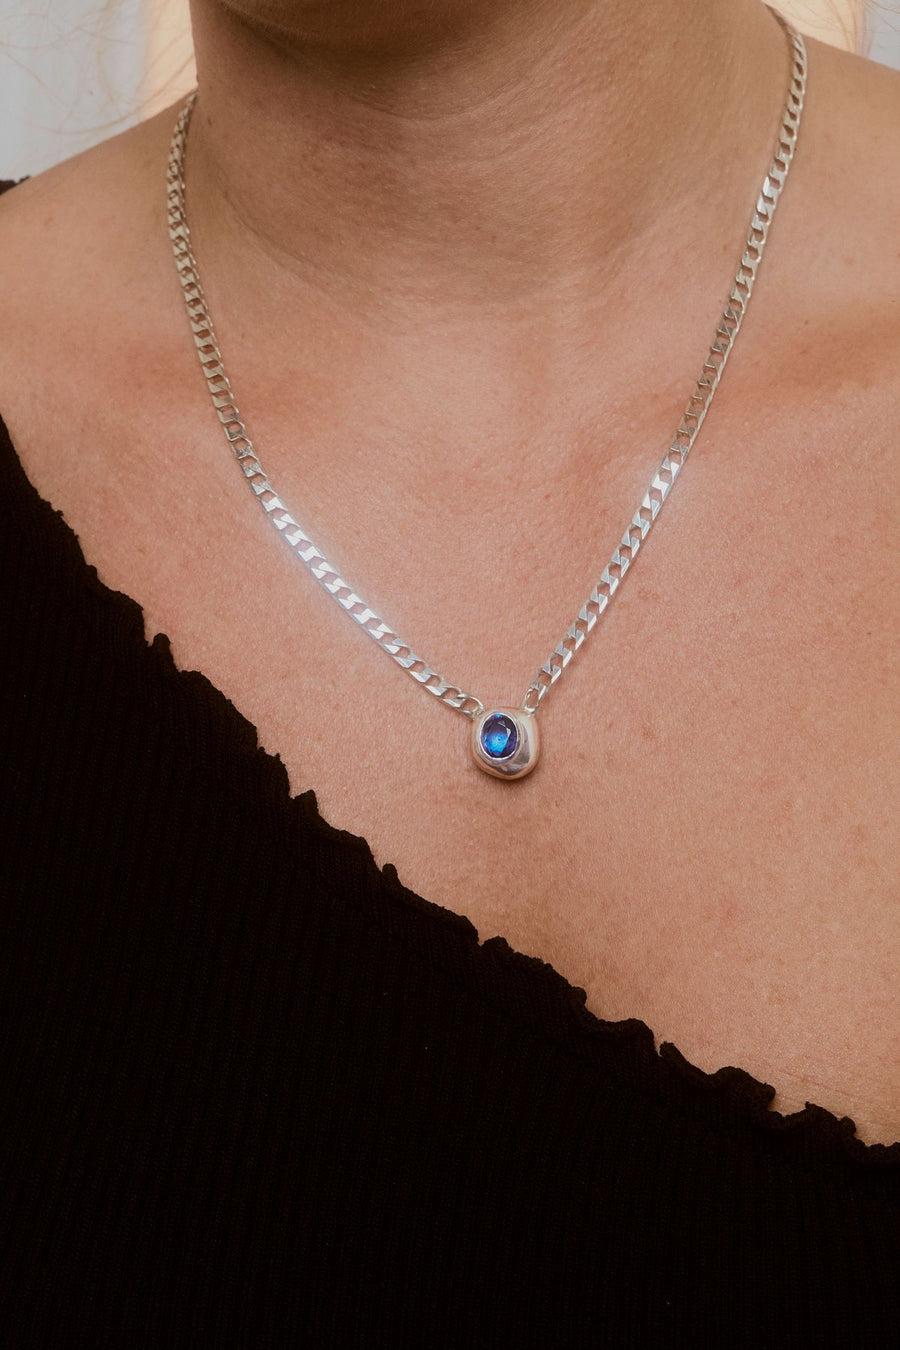 Hernan Herdez- Sapphire Curb Chain necklace-Jewellery-jewelry-Jeryco Store- London- Necklace-Blue Sapphire necklace- Flat Curb Chain necklace- sustainable brand-necklaces for him- necklaces for her-necklaces that are unisex-4ct Sapphire pendant necklace